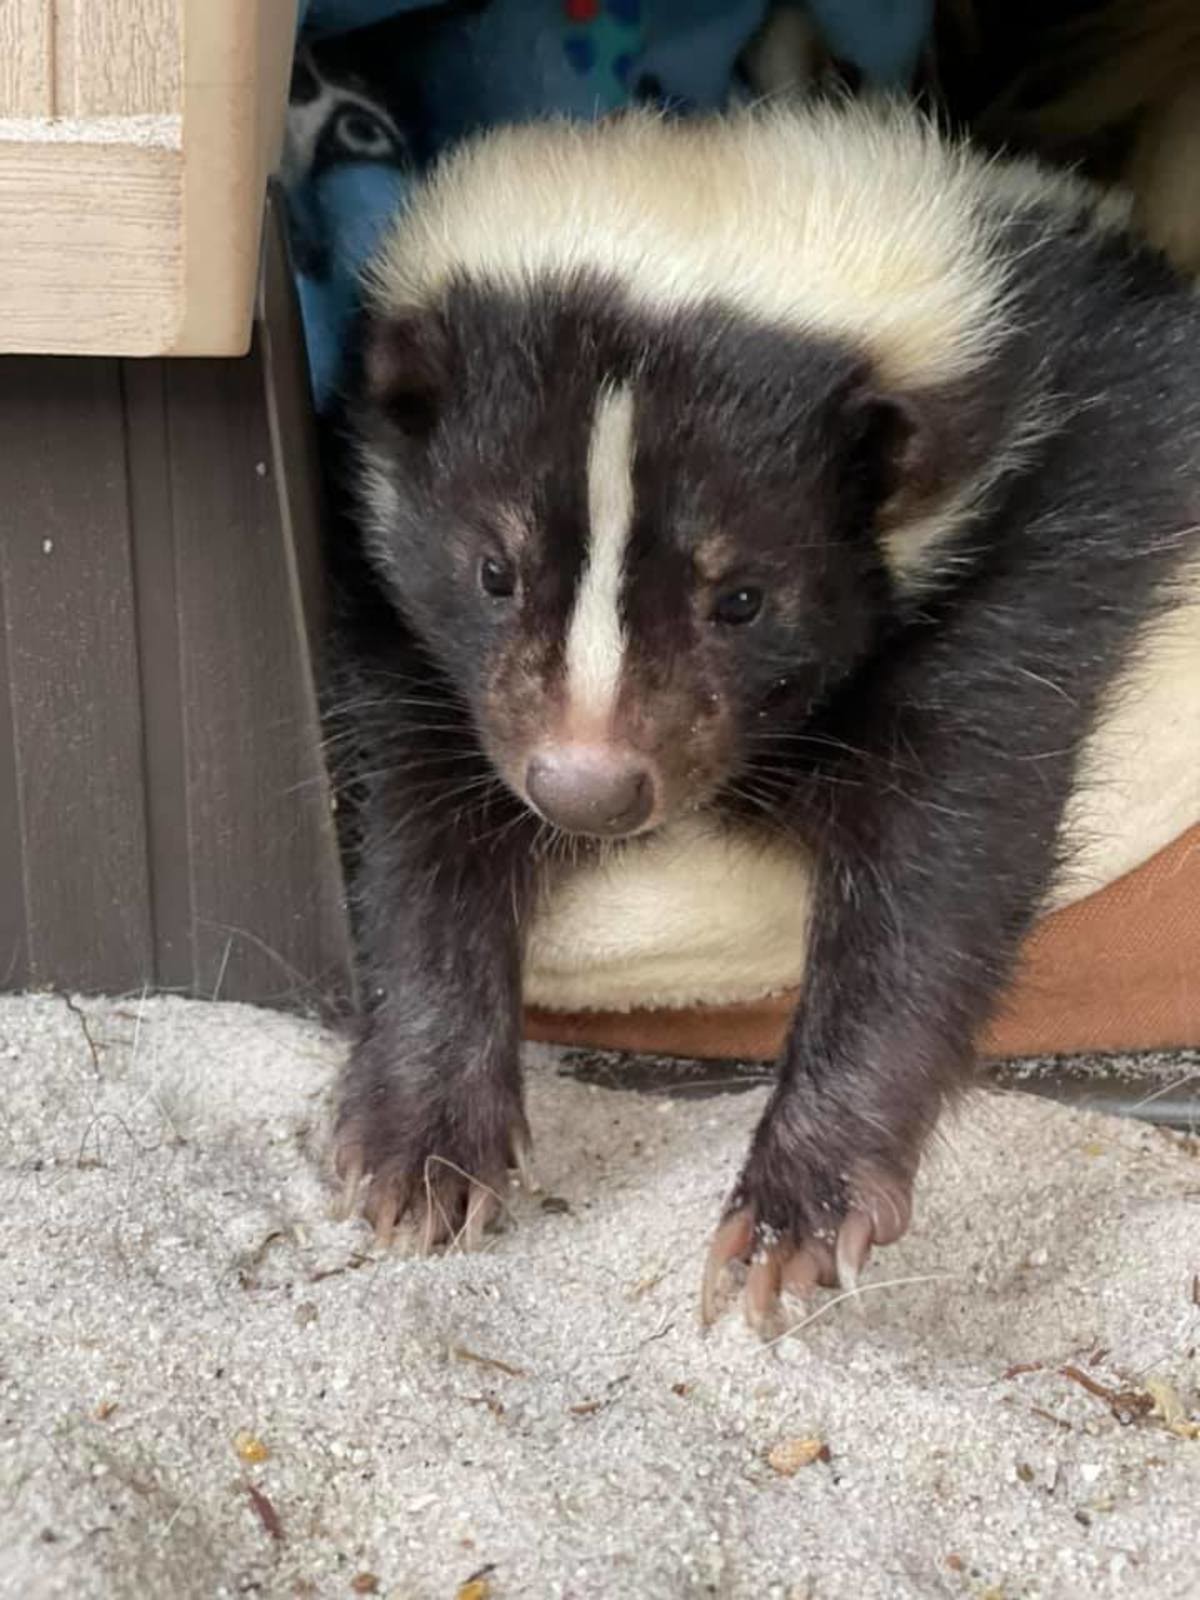 Sknuk. join list: RescueCritters (53 subs)Mention History This is Chandler the skunk from 101 Paws and Claws.. little skunker with his tappy taps